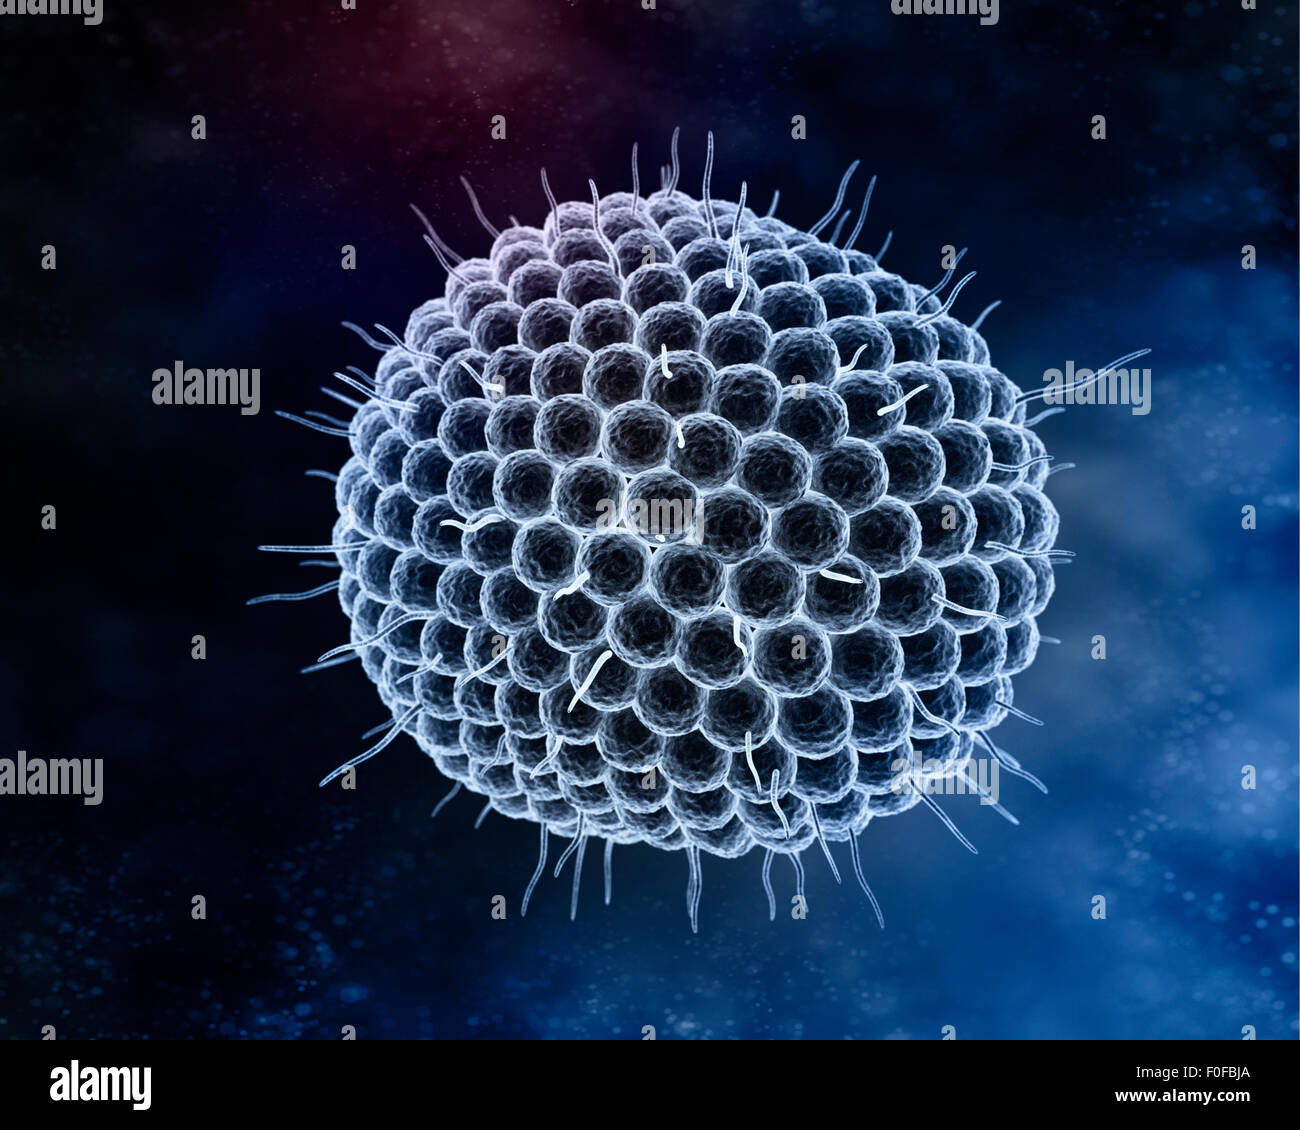 Varicella zoster virus or varicella-zoster virus (VZV) is one of eight herpesviruses known to infect humans and vertebrates. VZV Stock Photo